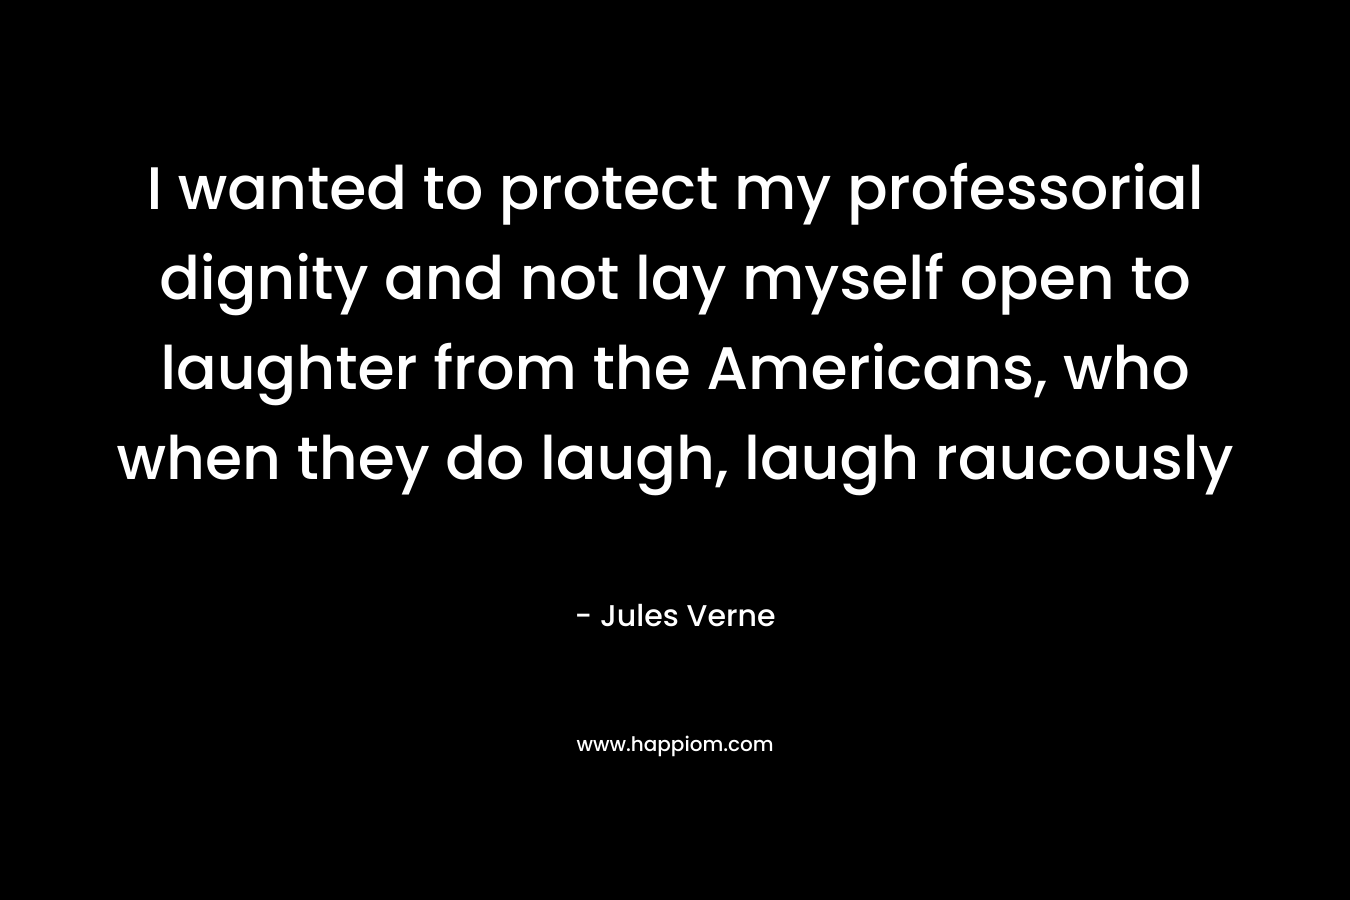 I wanted to protect my professorial dignity and not lay myself open to laughter from the Americans, who when they do laugh, laugh raucously – Jules Verne